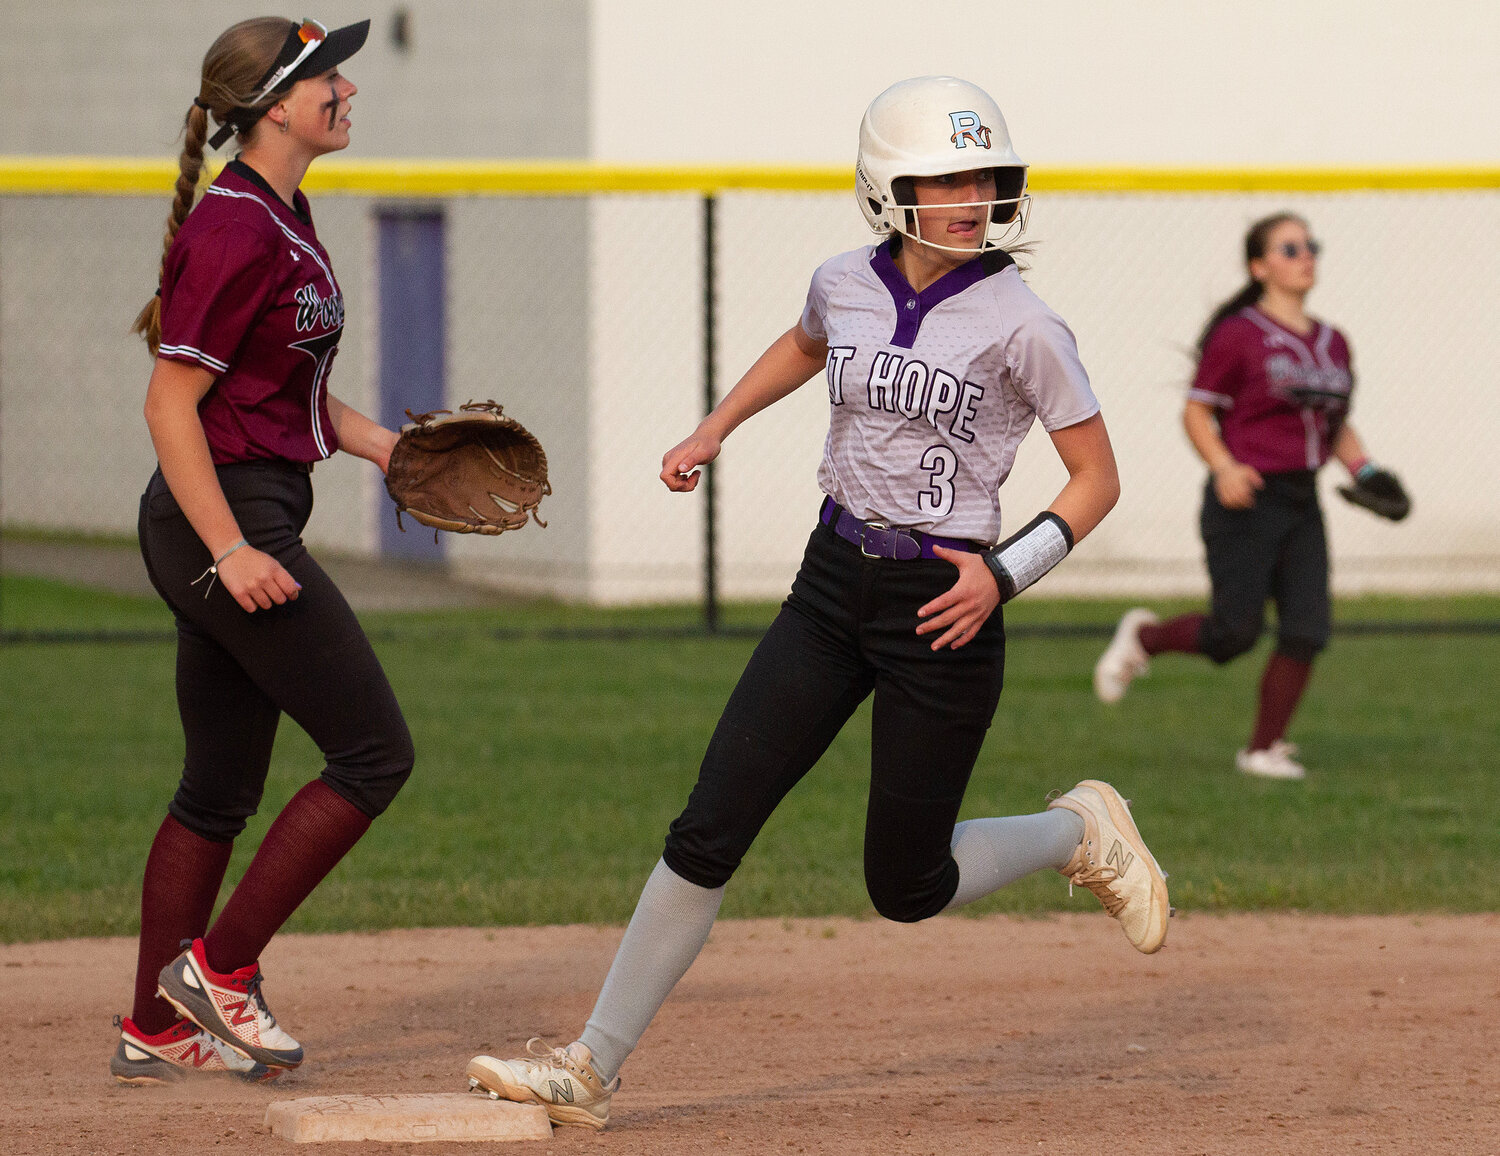 Ava Waddell looks to round second base during the Woonsocket game.